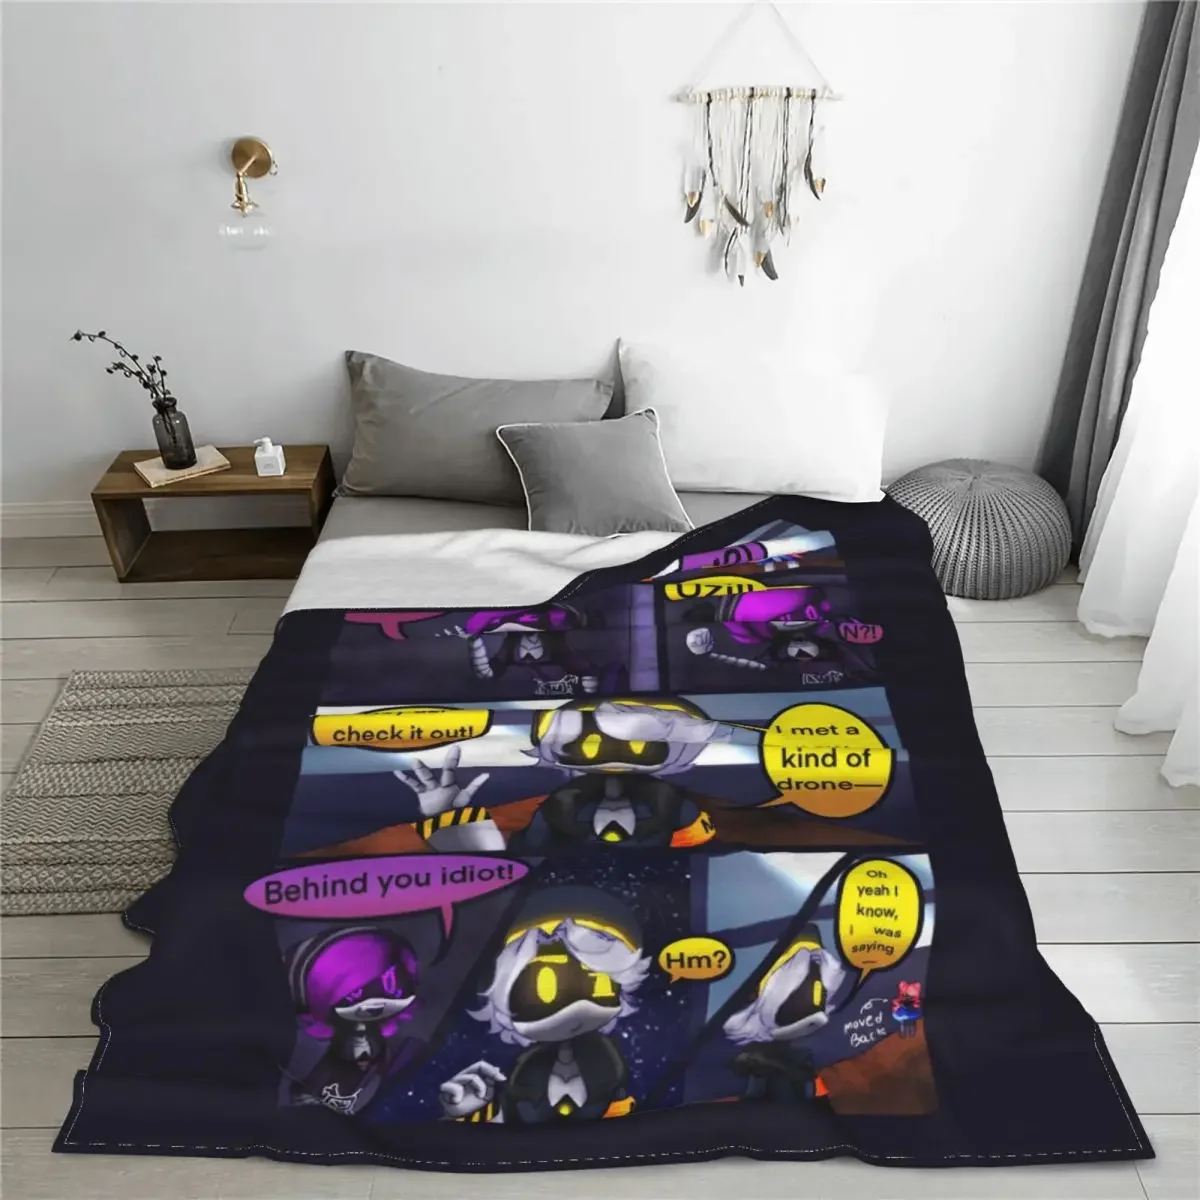 Murder Drones Blanket N ir Uzi Flanel Awesome Soft Throw Blanket for Bedverse Spring Autumn Nuotrauka 1